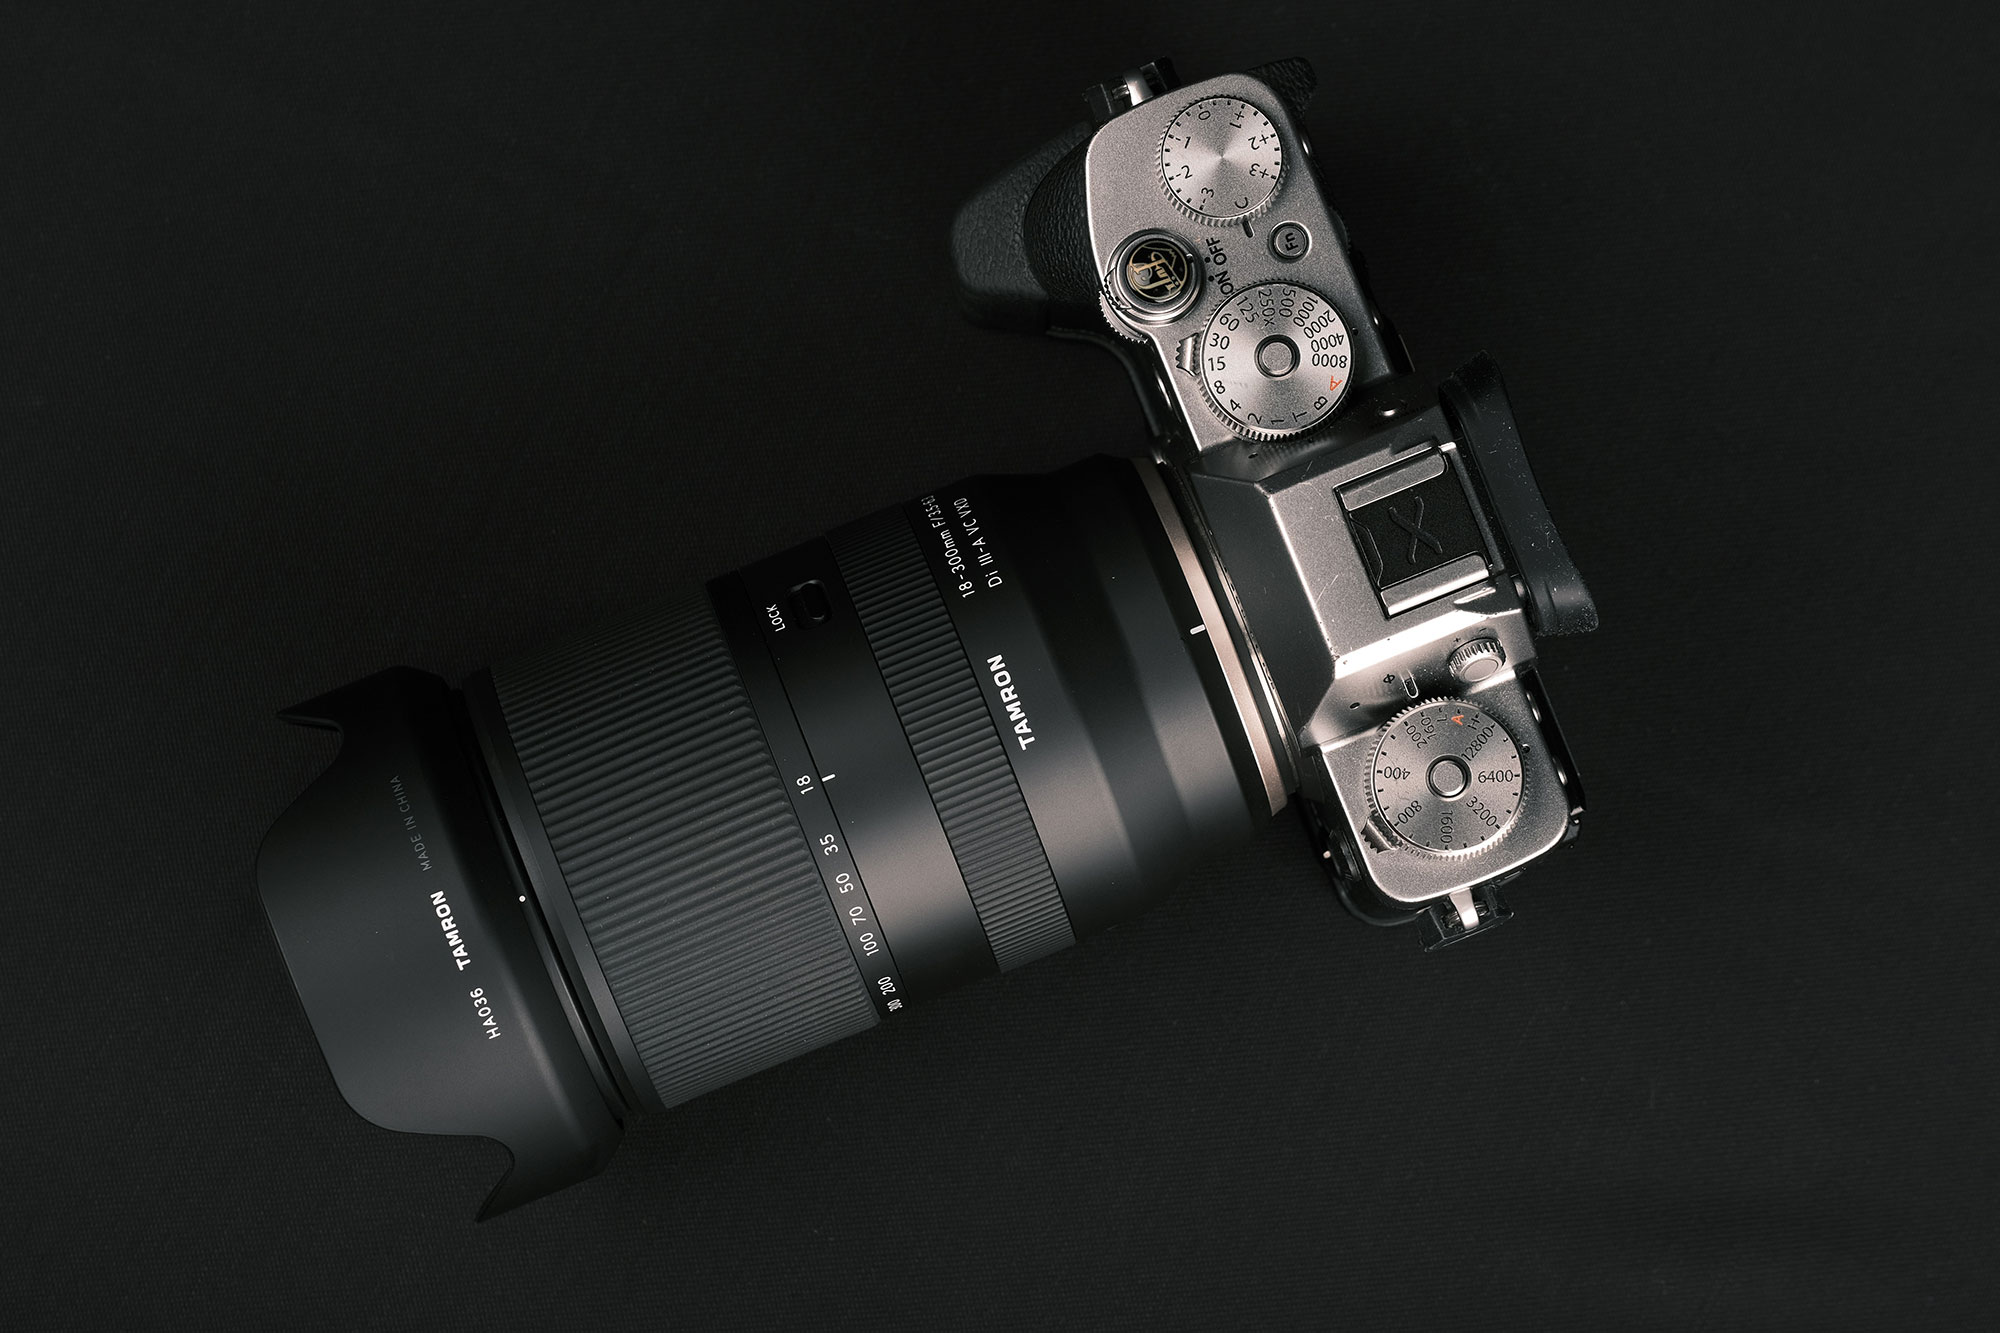 Tamron 18-300mm: The best all-rounder lens?